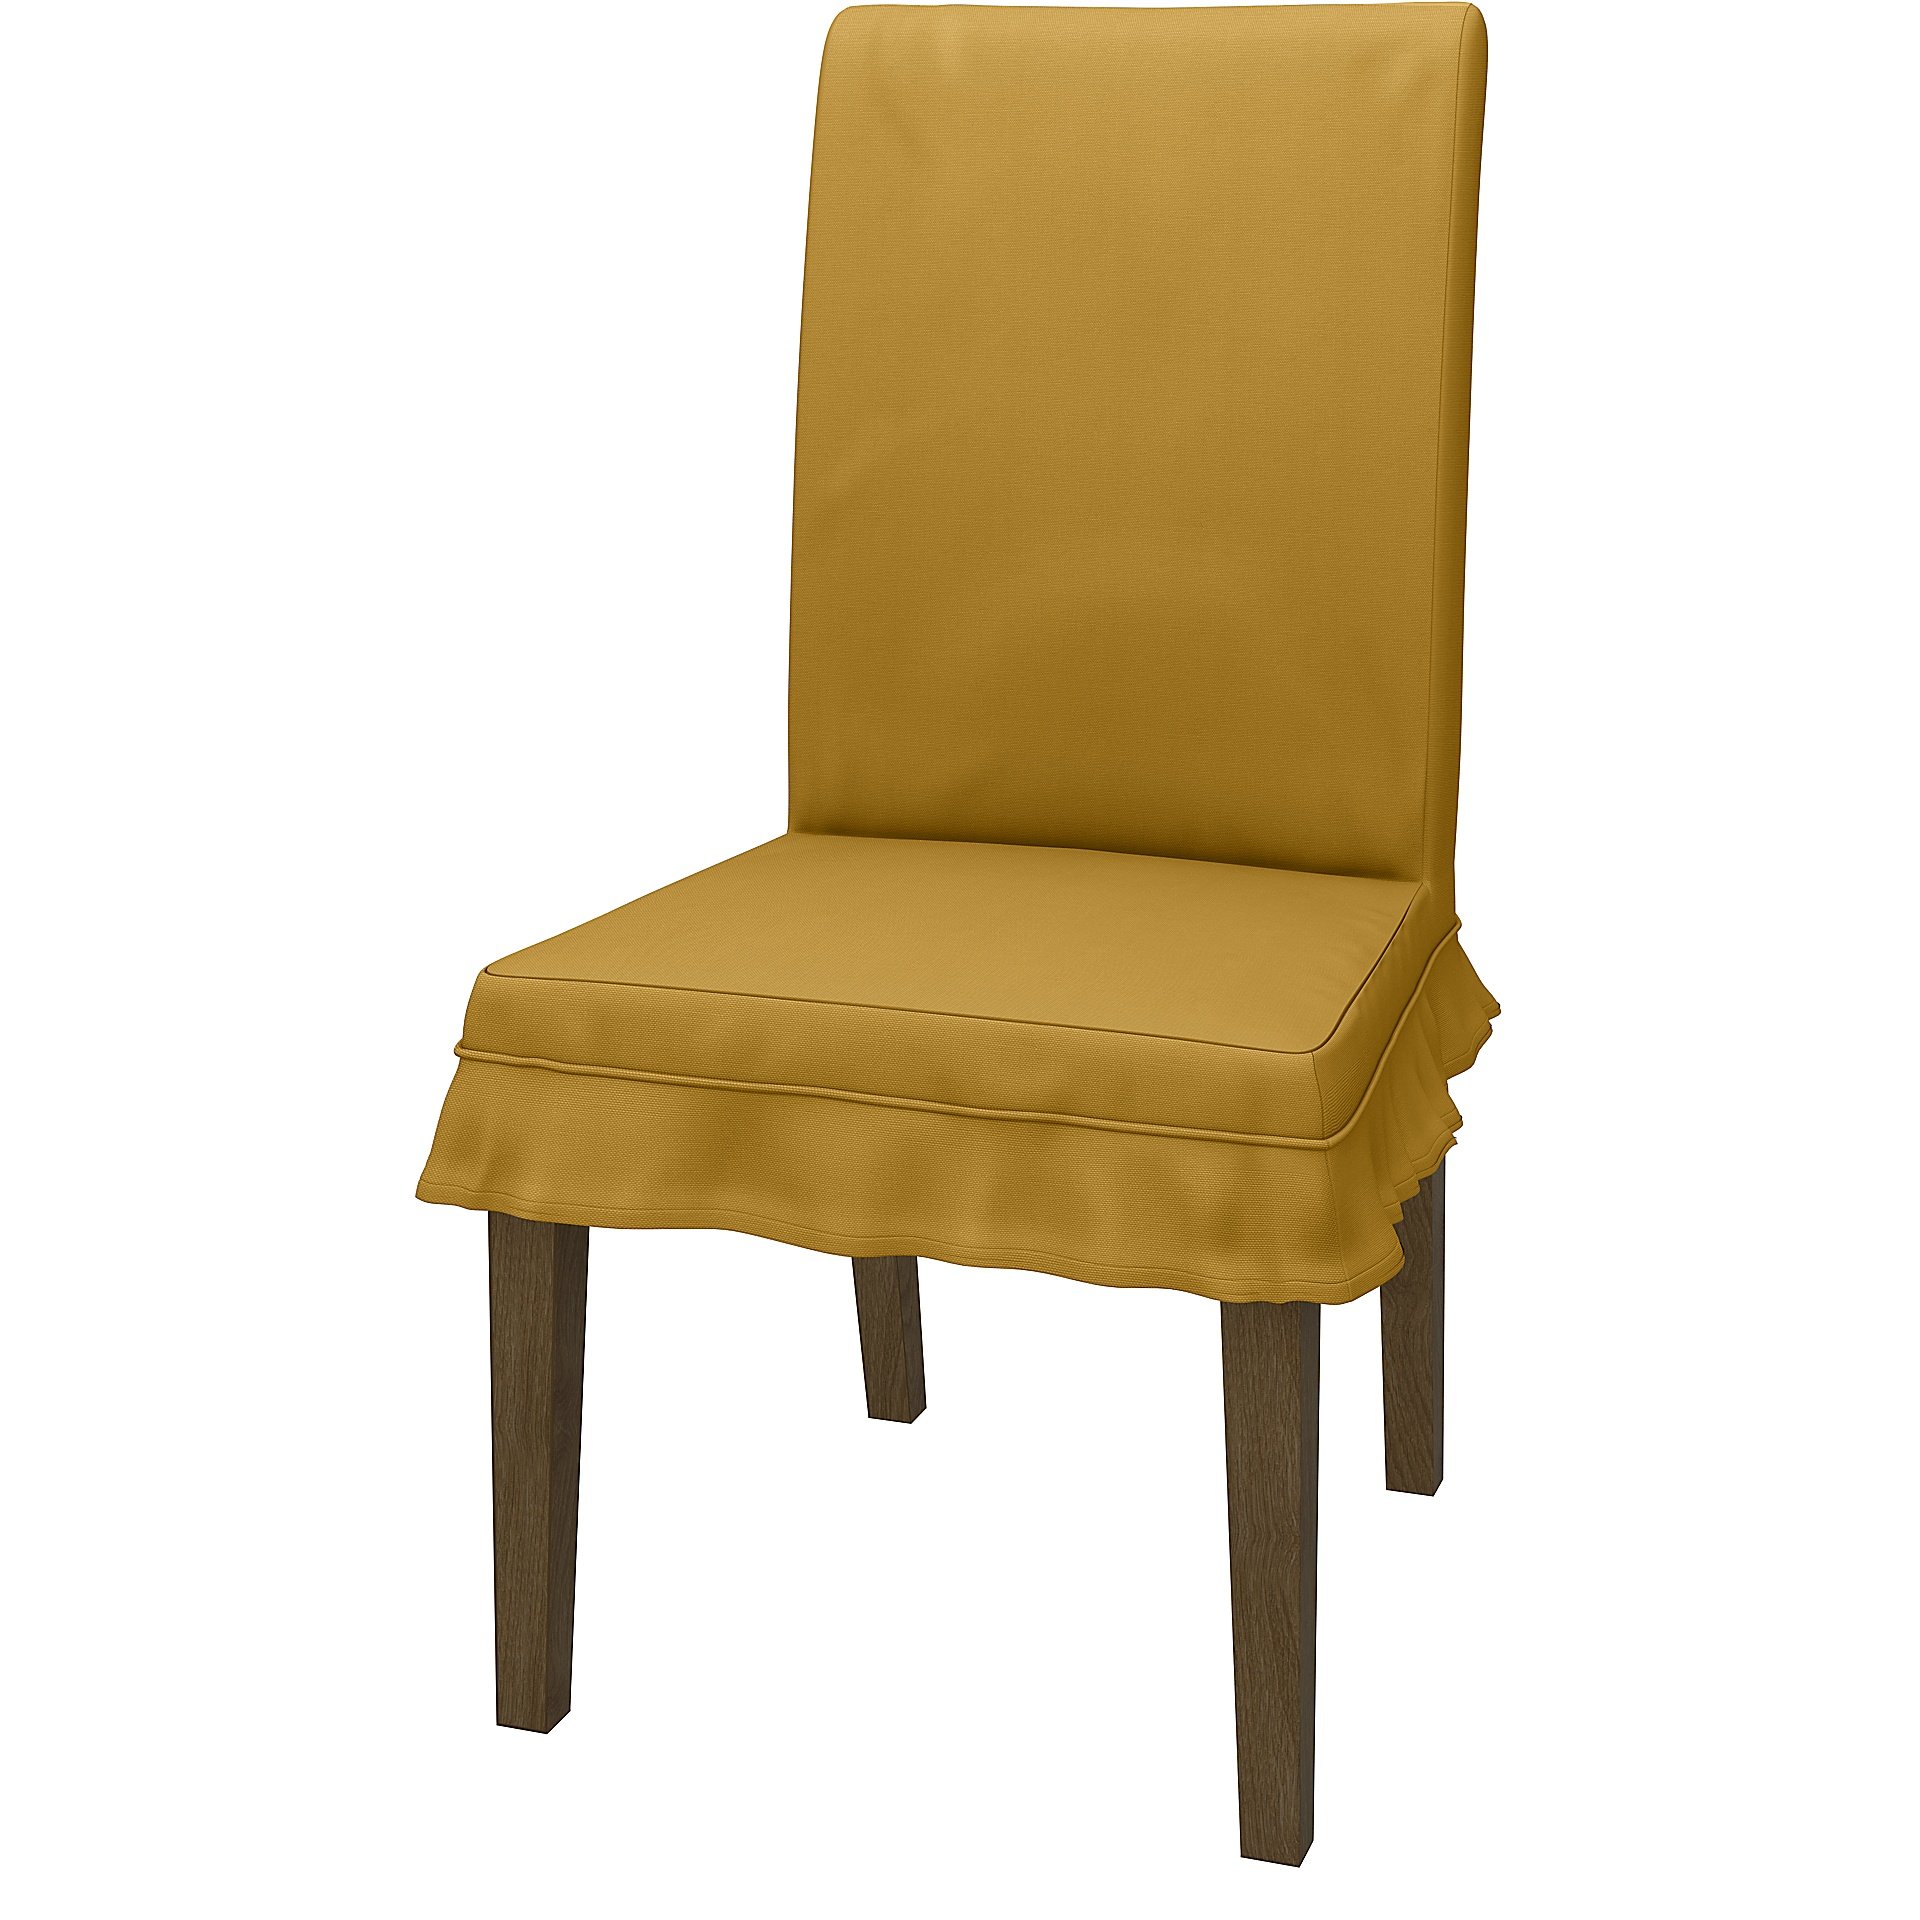 IKEA - HENRIKSDAL DINING CHAIR COVER SHORT SKIRT WITH RUFFLES (STANDARD MODEL), Honey Mustard, Cotto